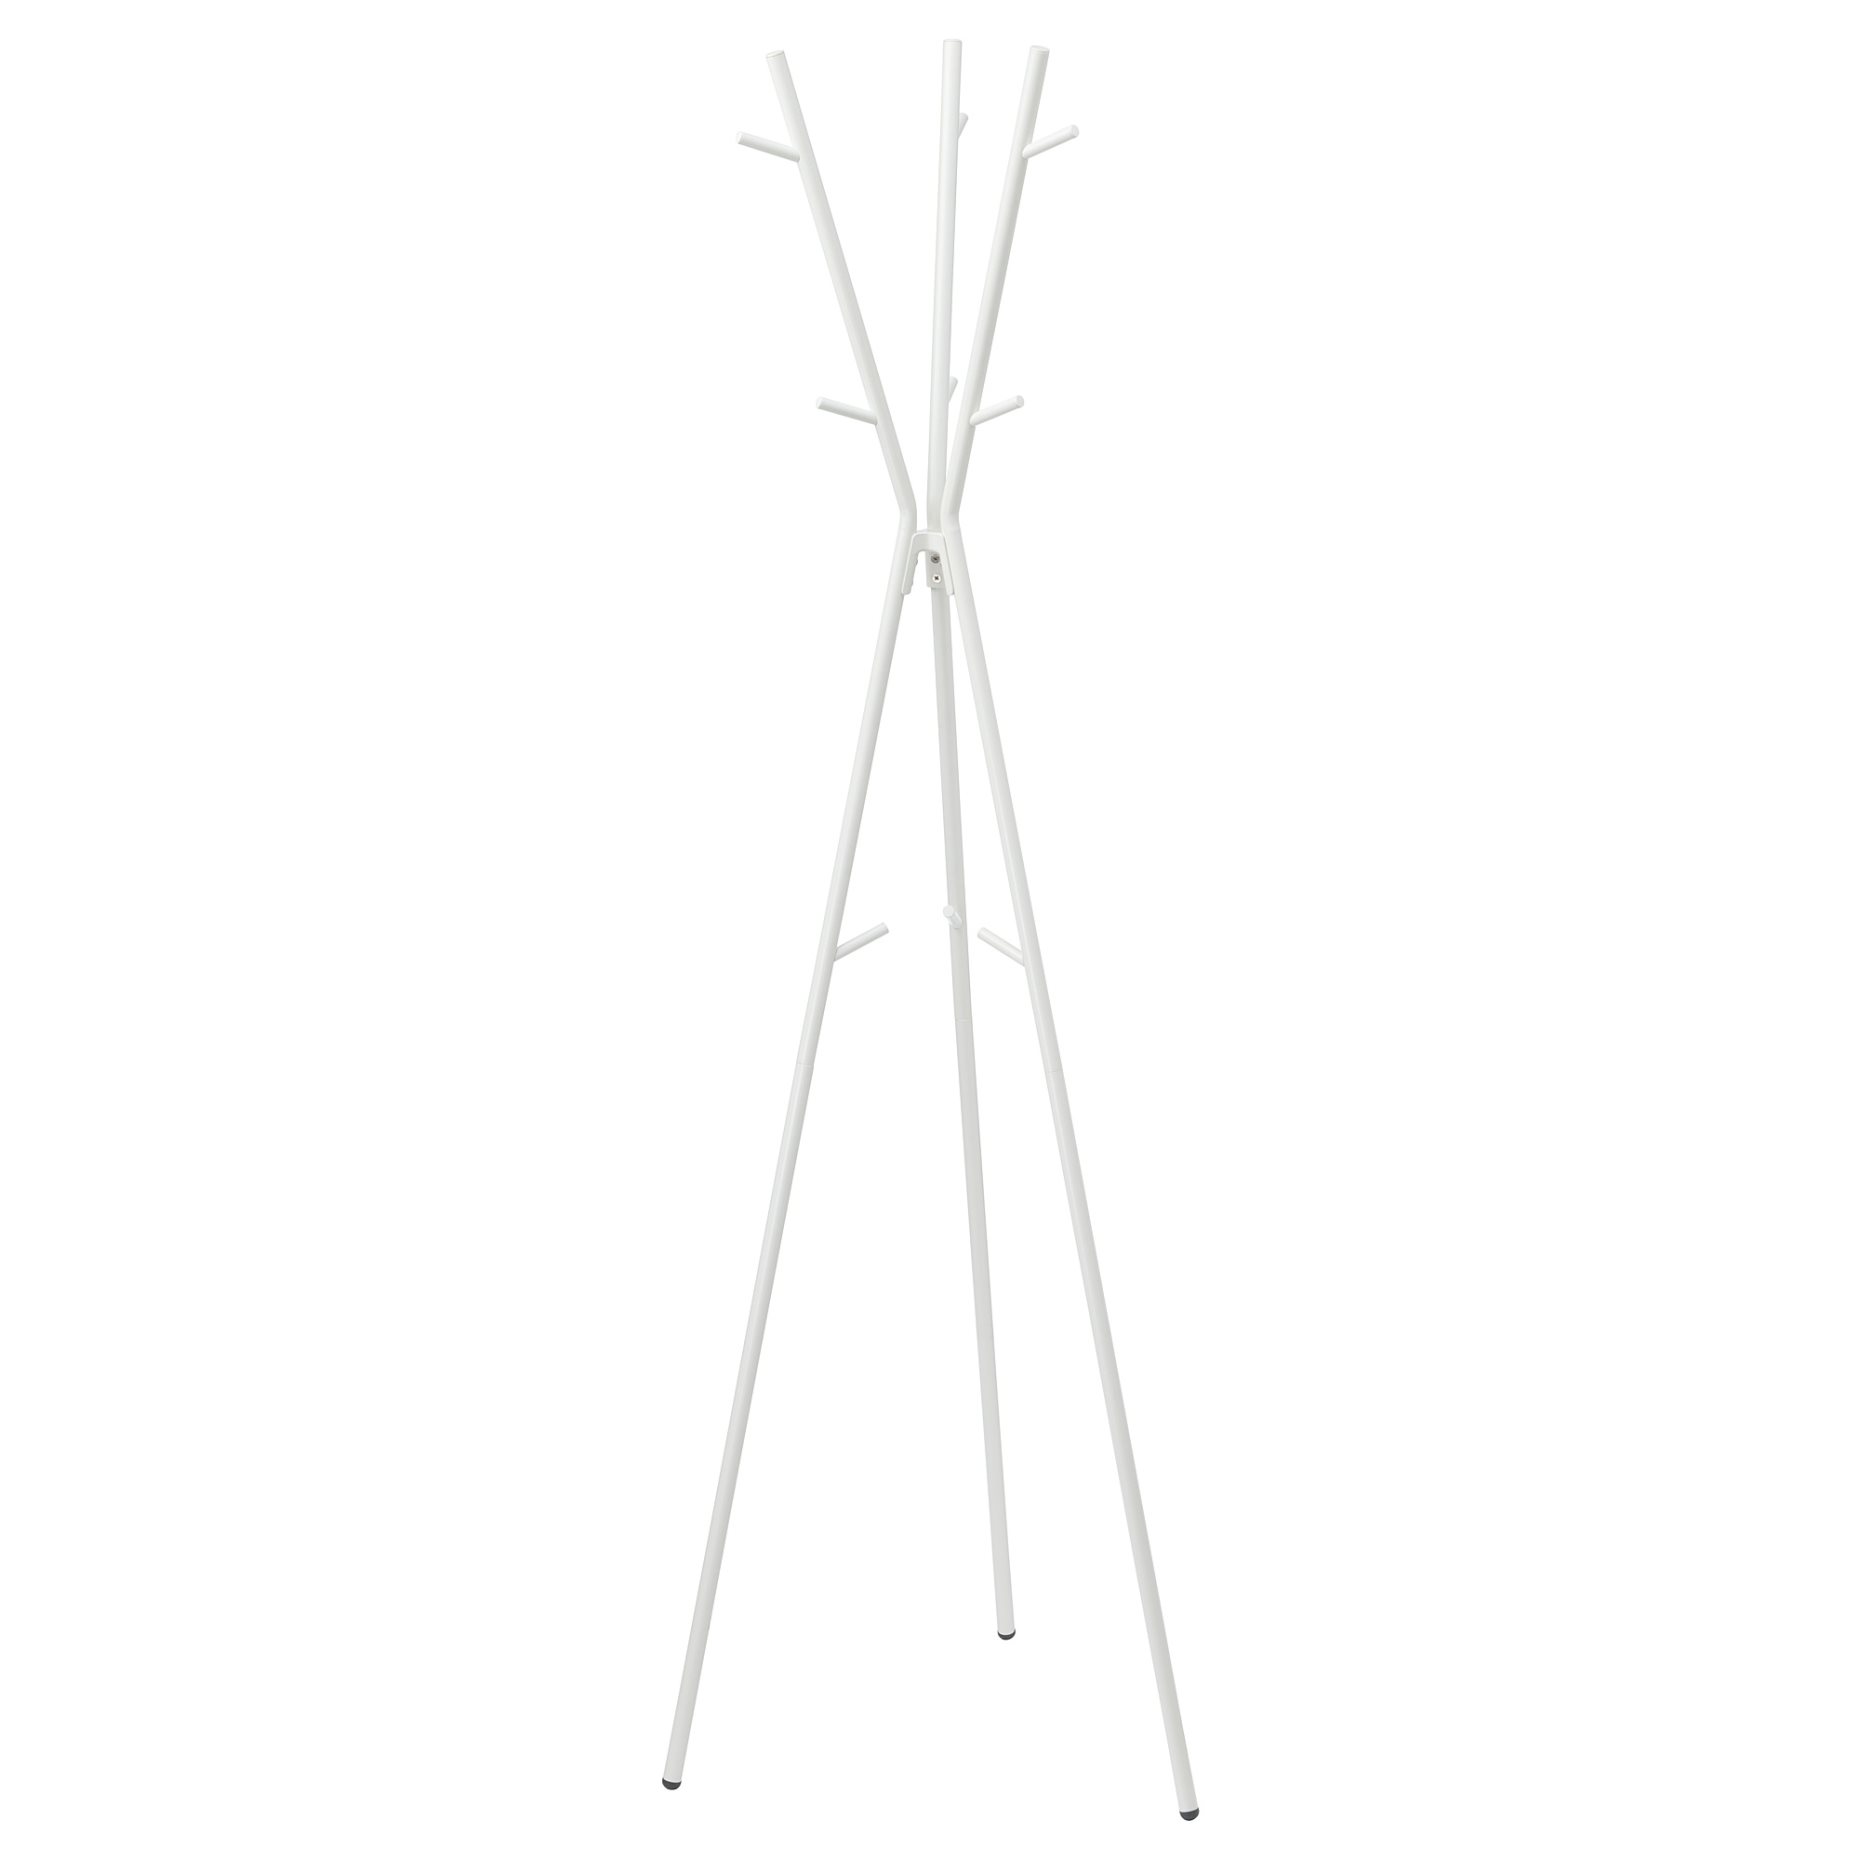 EKRAR, hat and coat stand, 104.155.94